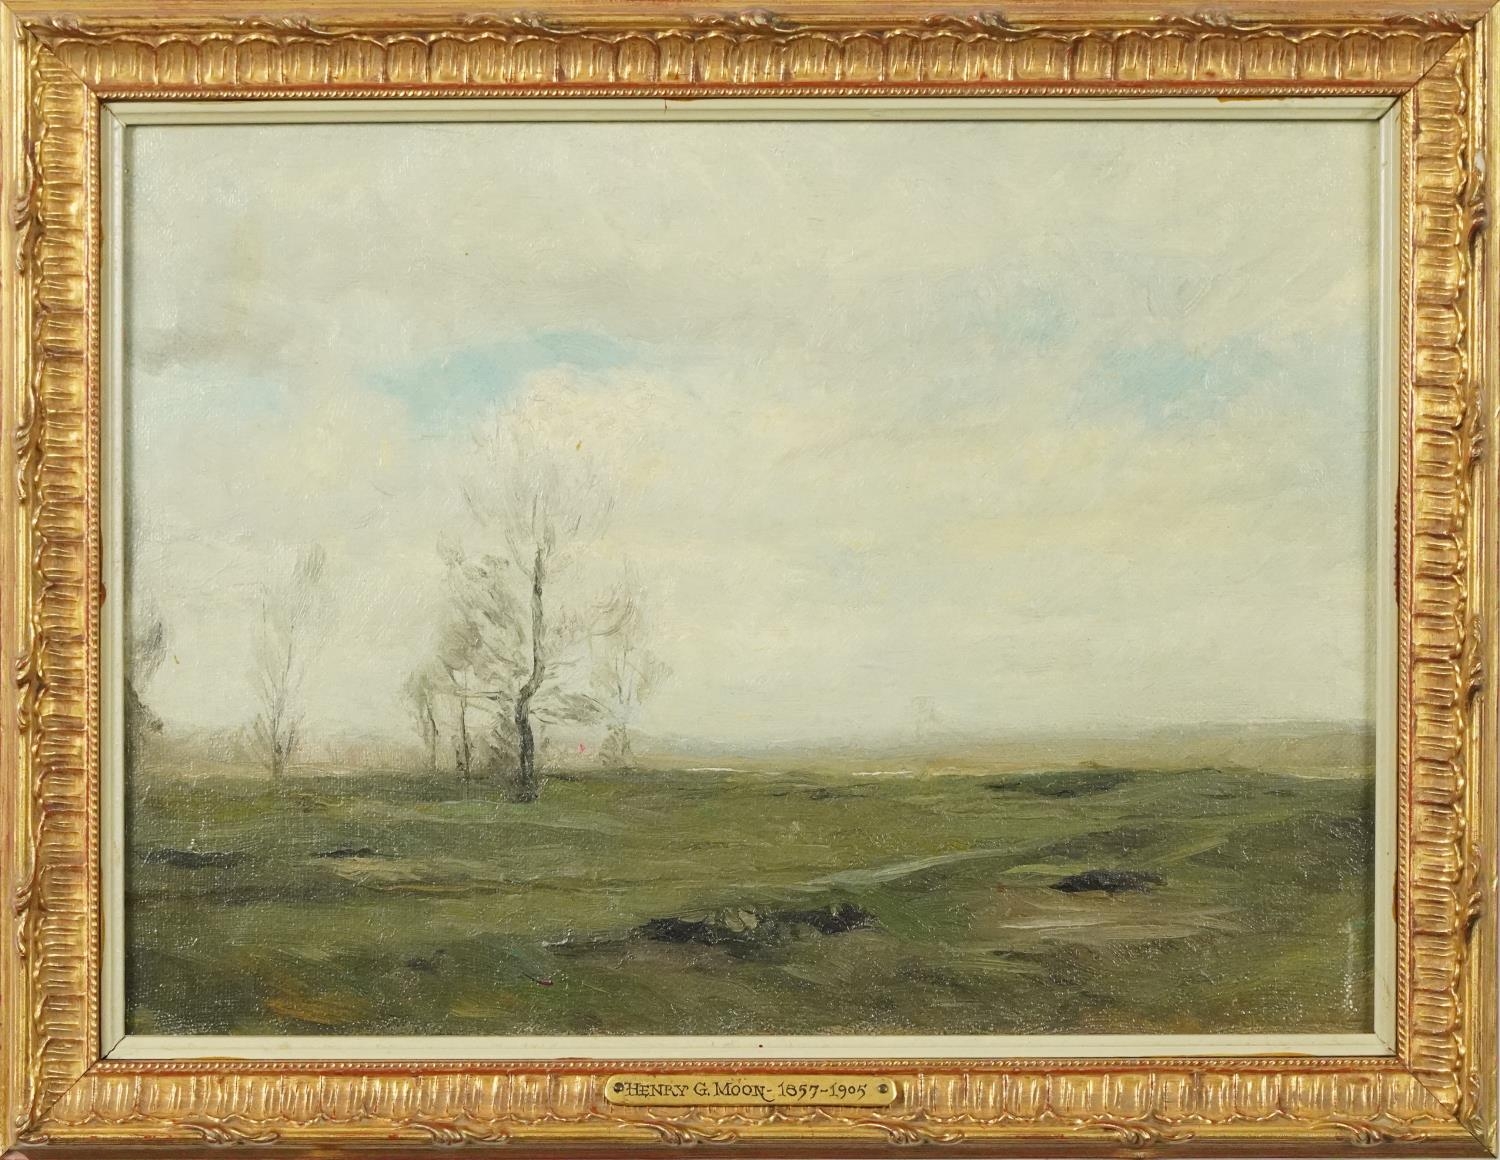 Henry George Moon - Rural landscape, 19th century English school oil on board, inscribed verso, - Image 2 of 5